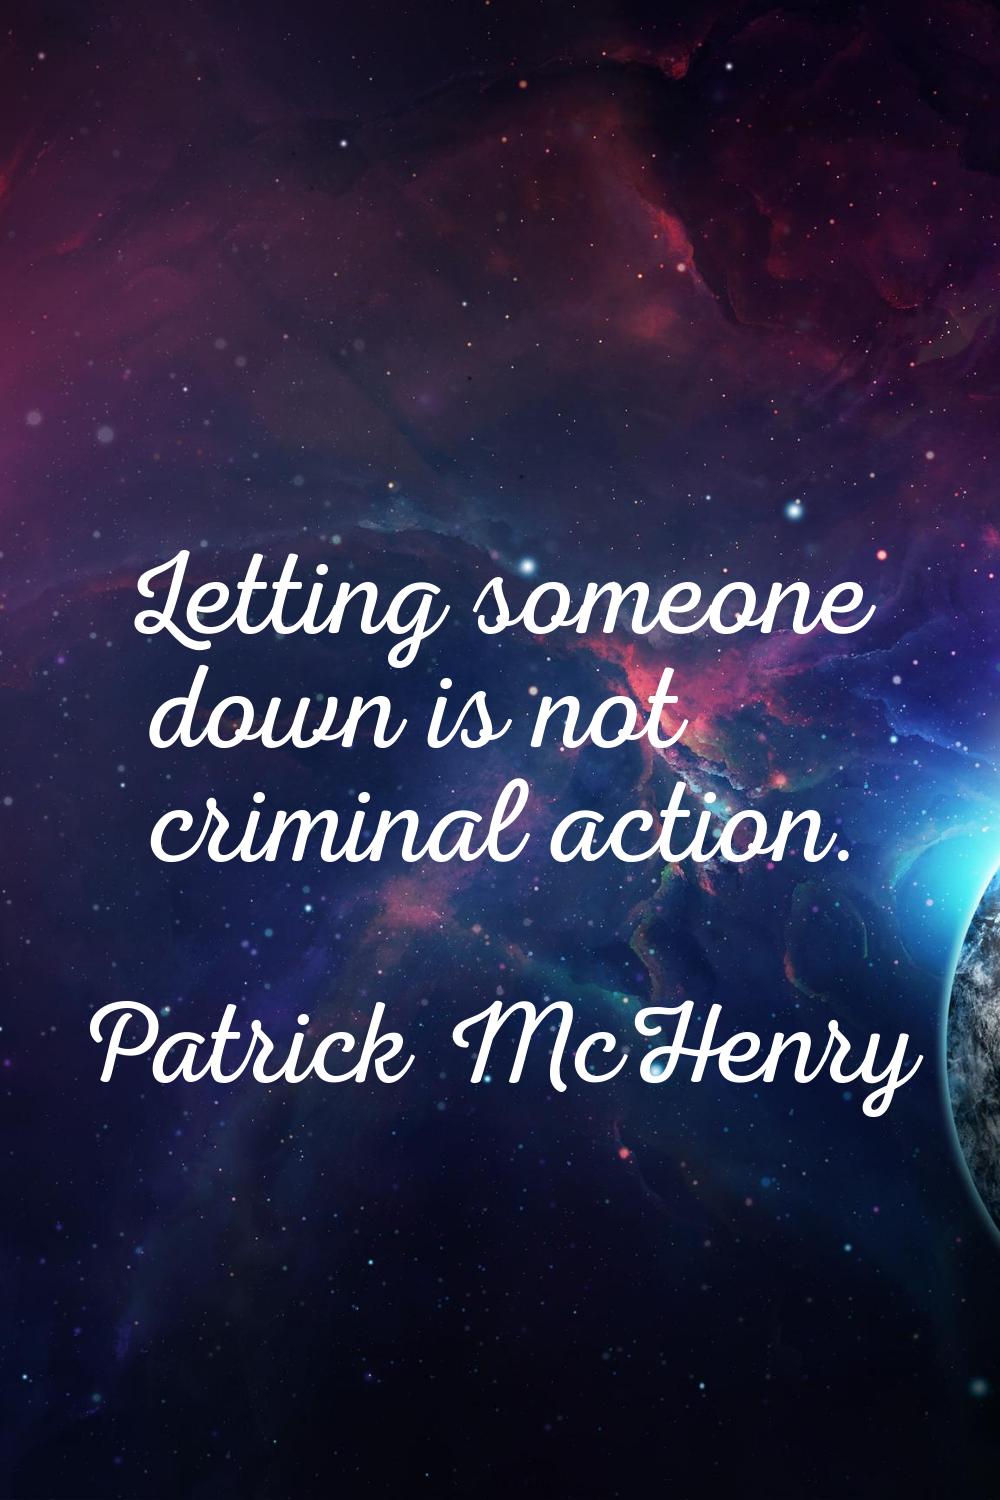 Letting someone down is not criminal action.